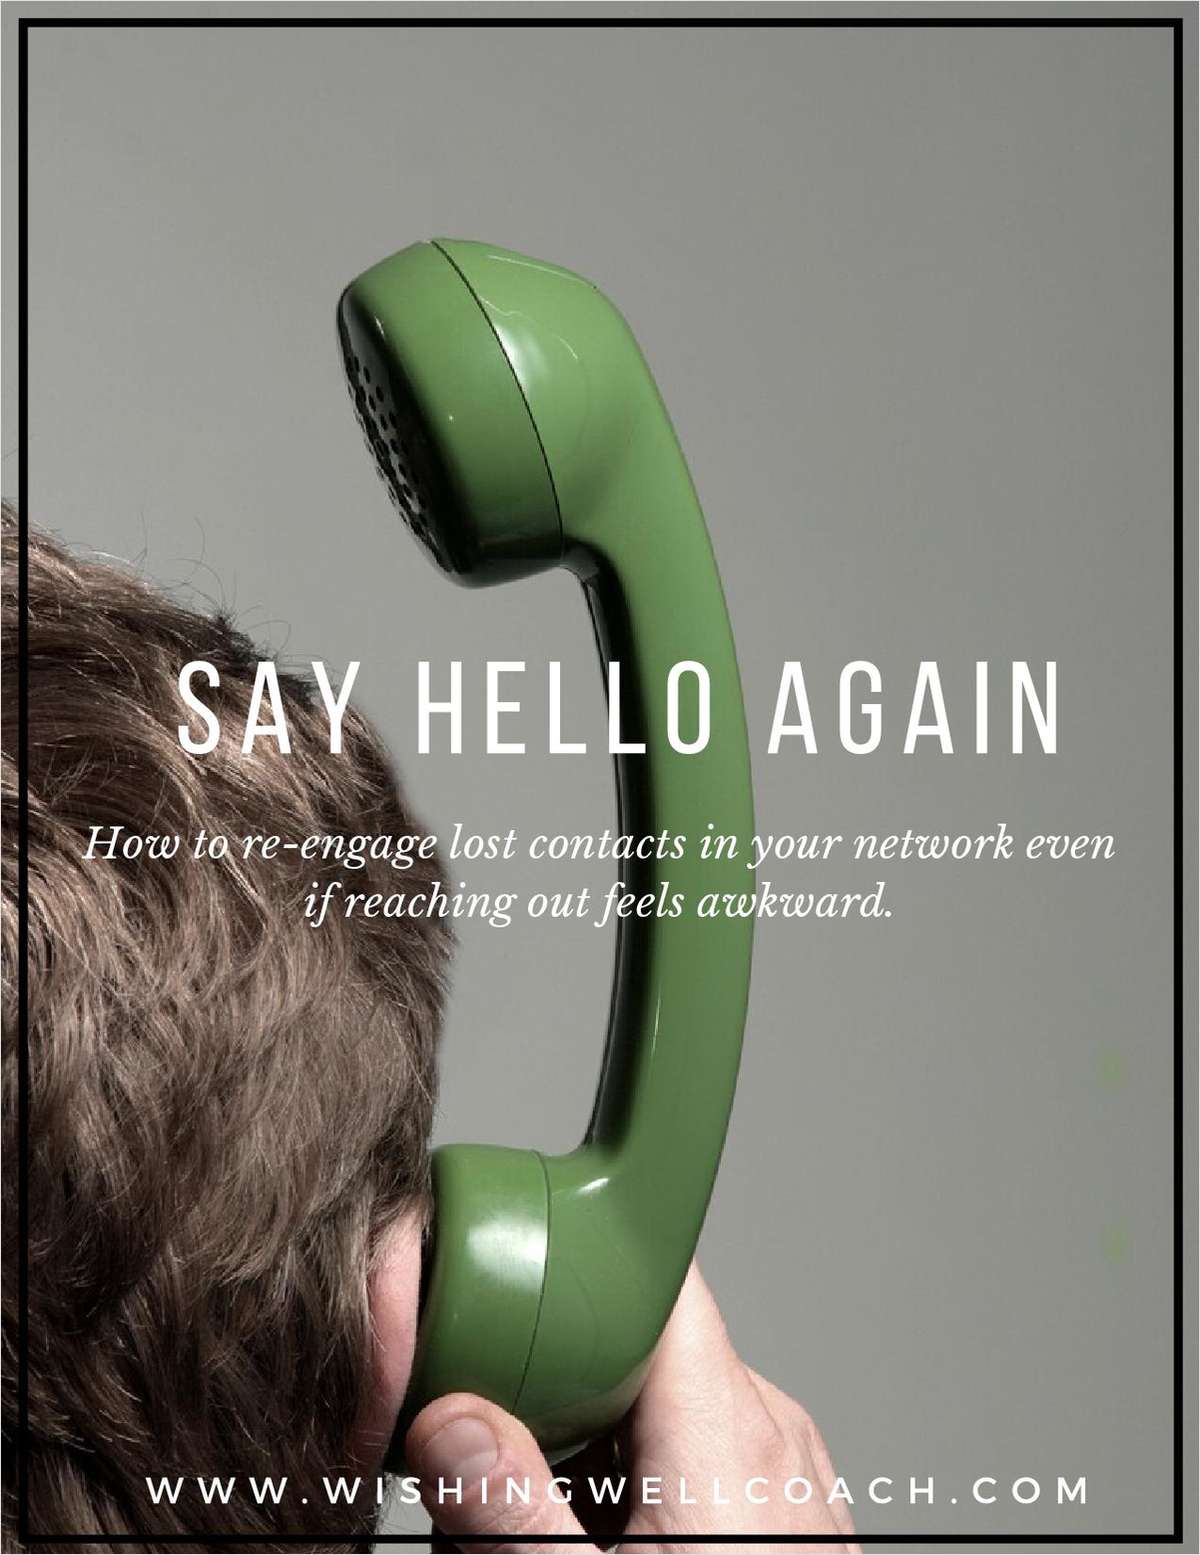 Say Hello Again - Reengage Lost Contacts